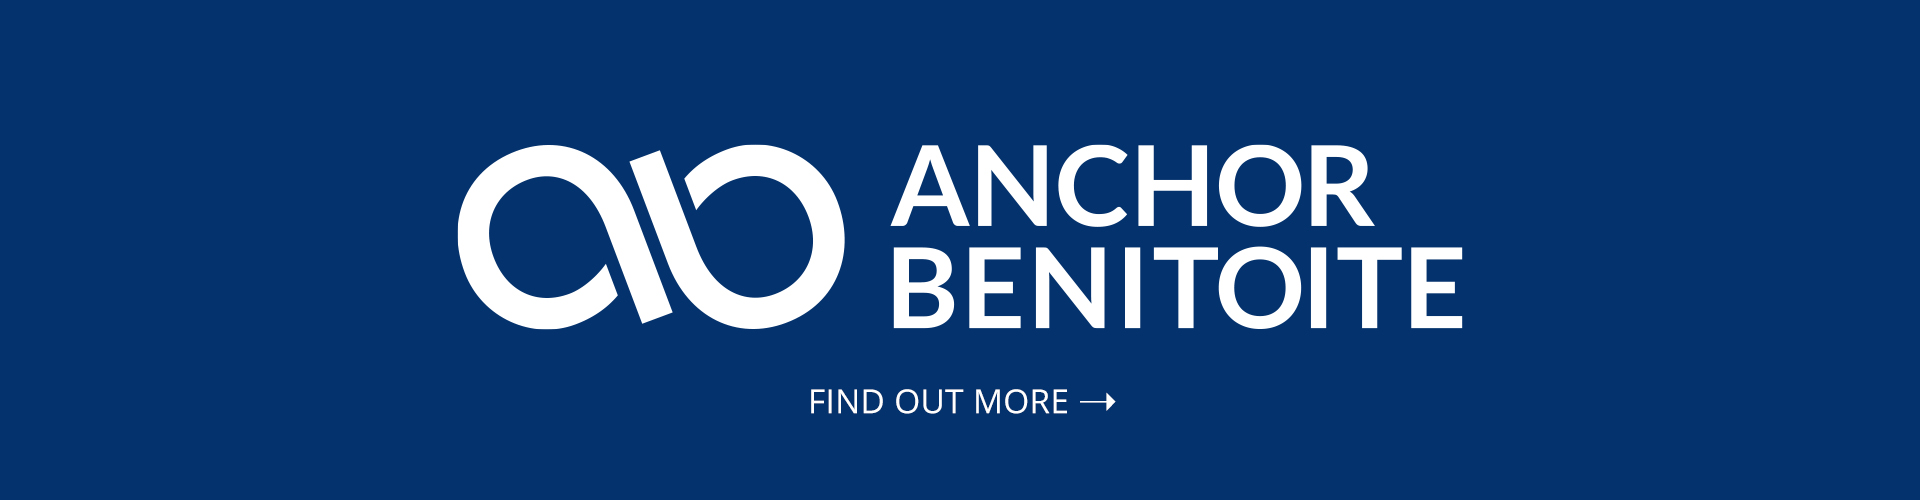 Anchor Benitoite - Anchorage Investments